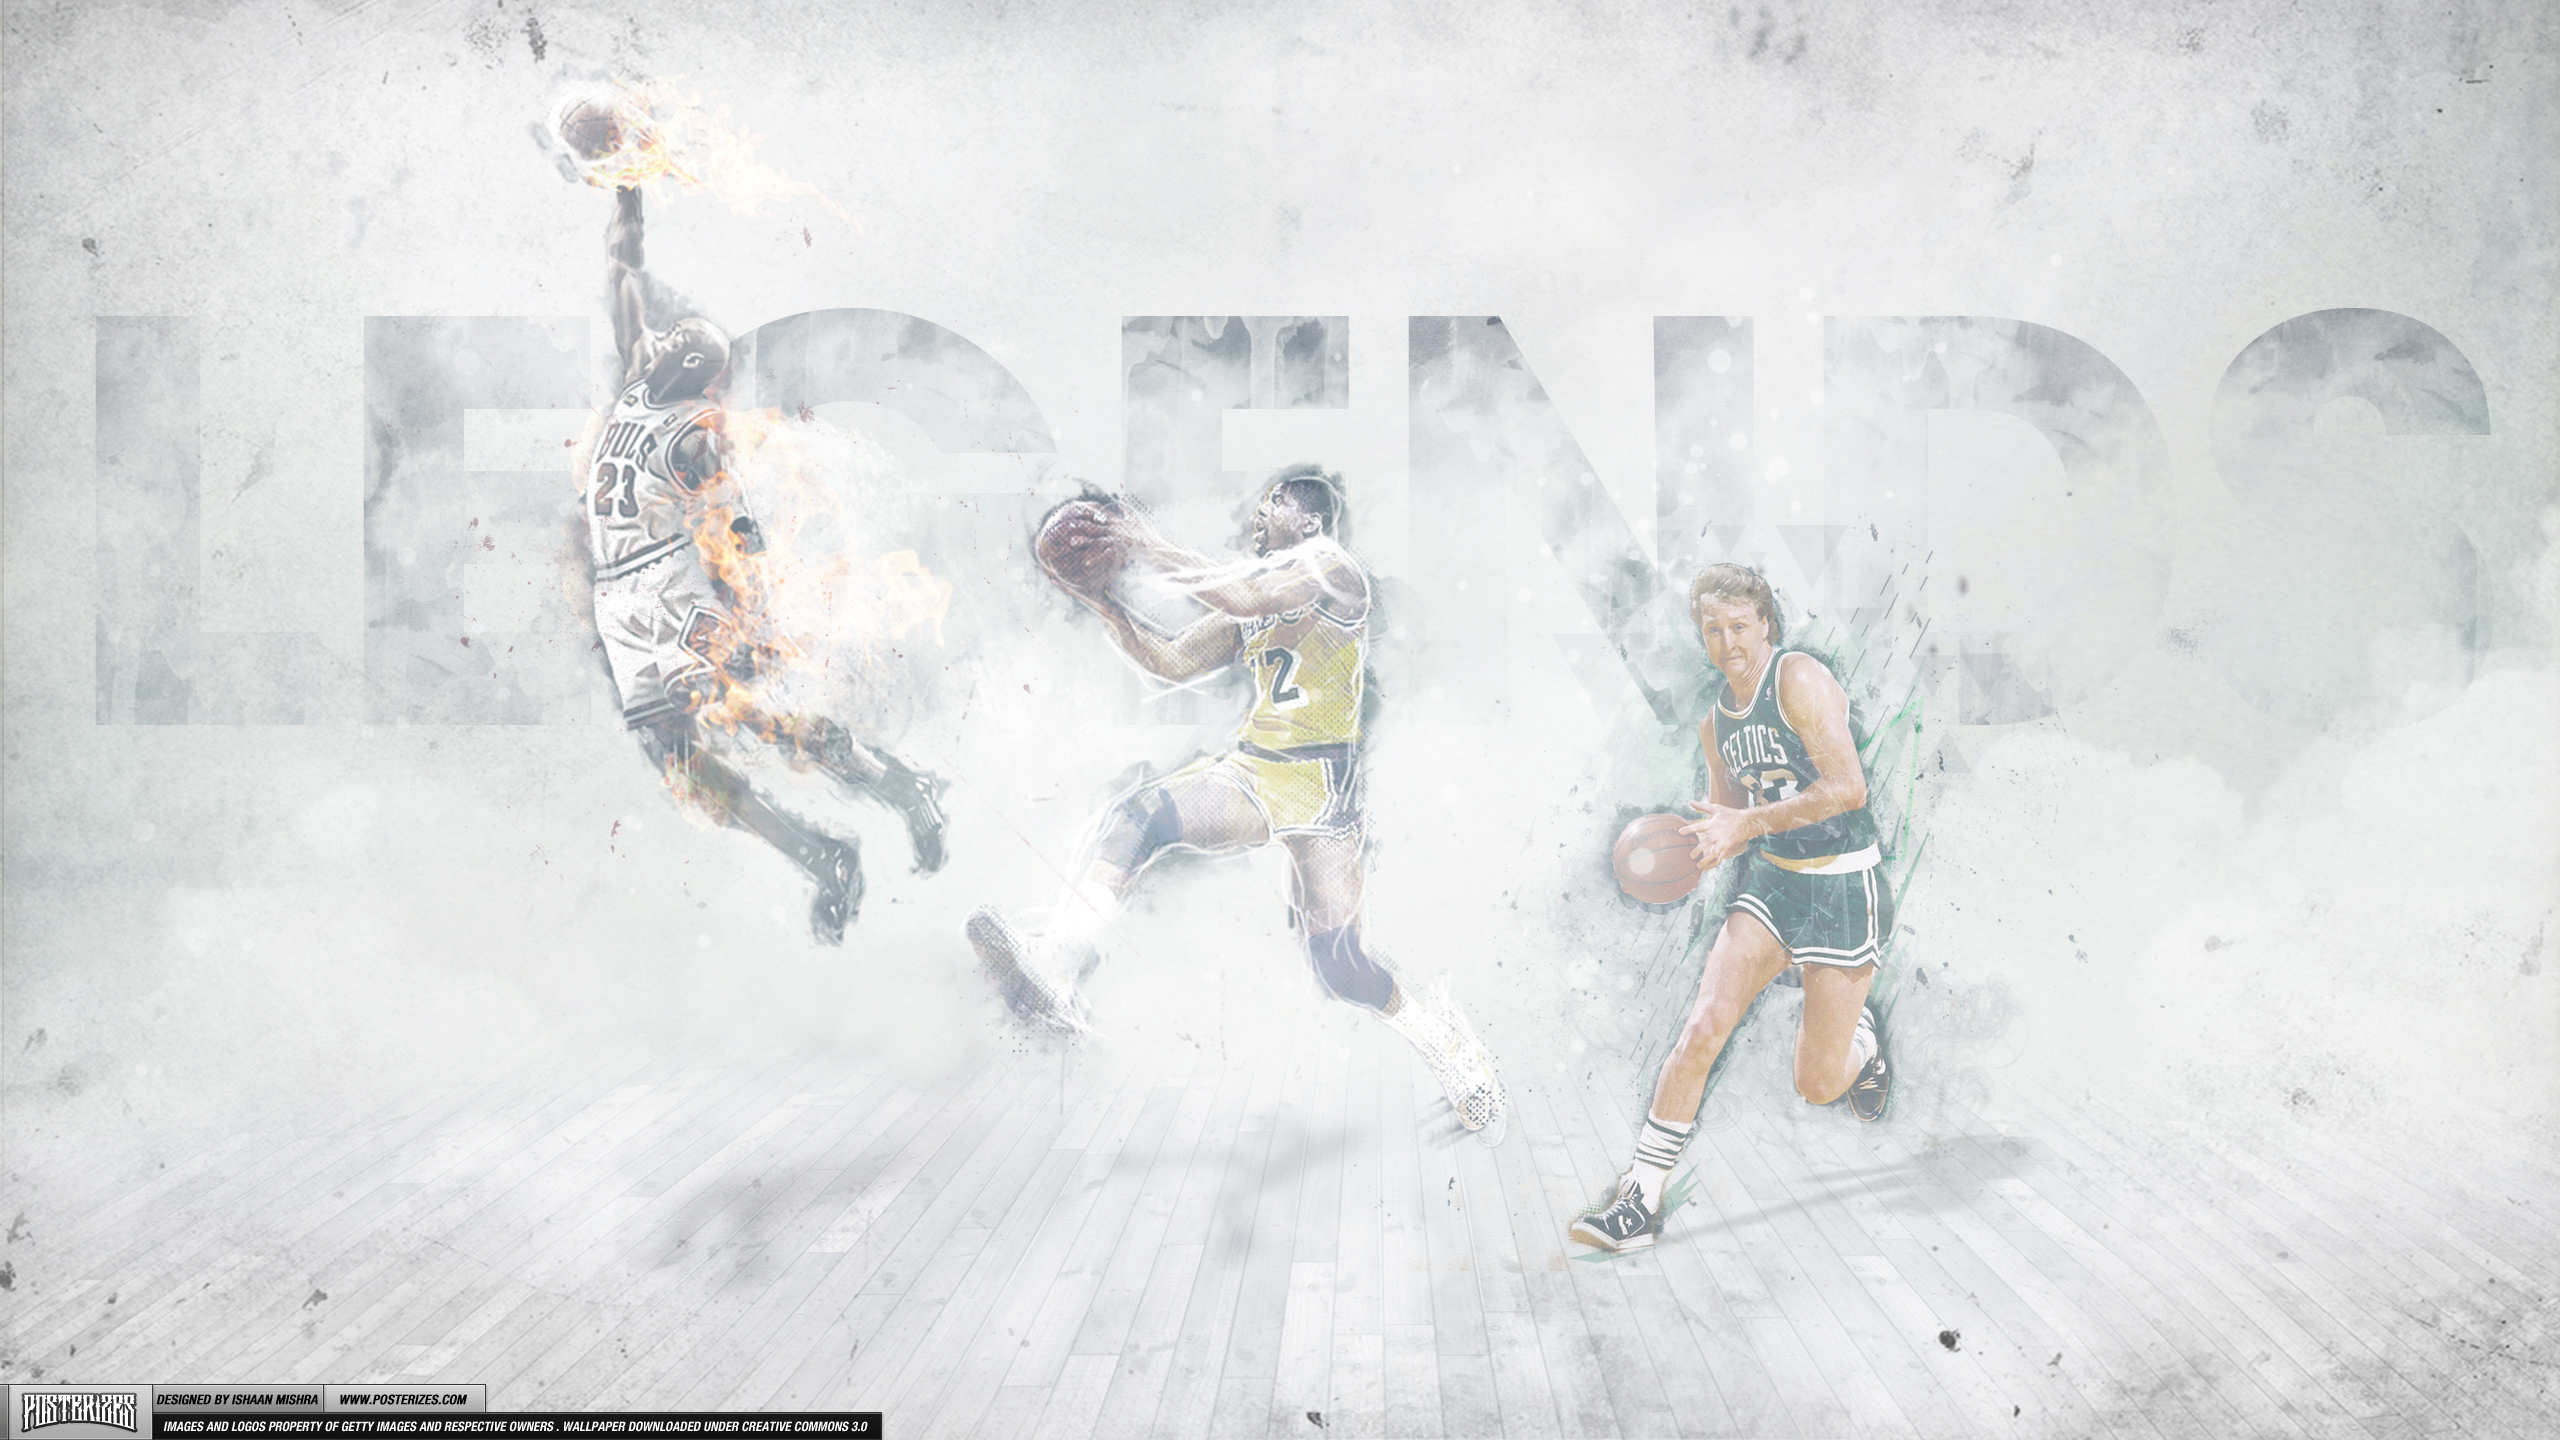 Larry Bird Wallpaper High Resolution And Quality